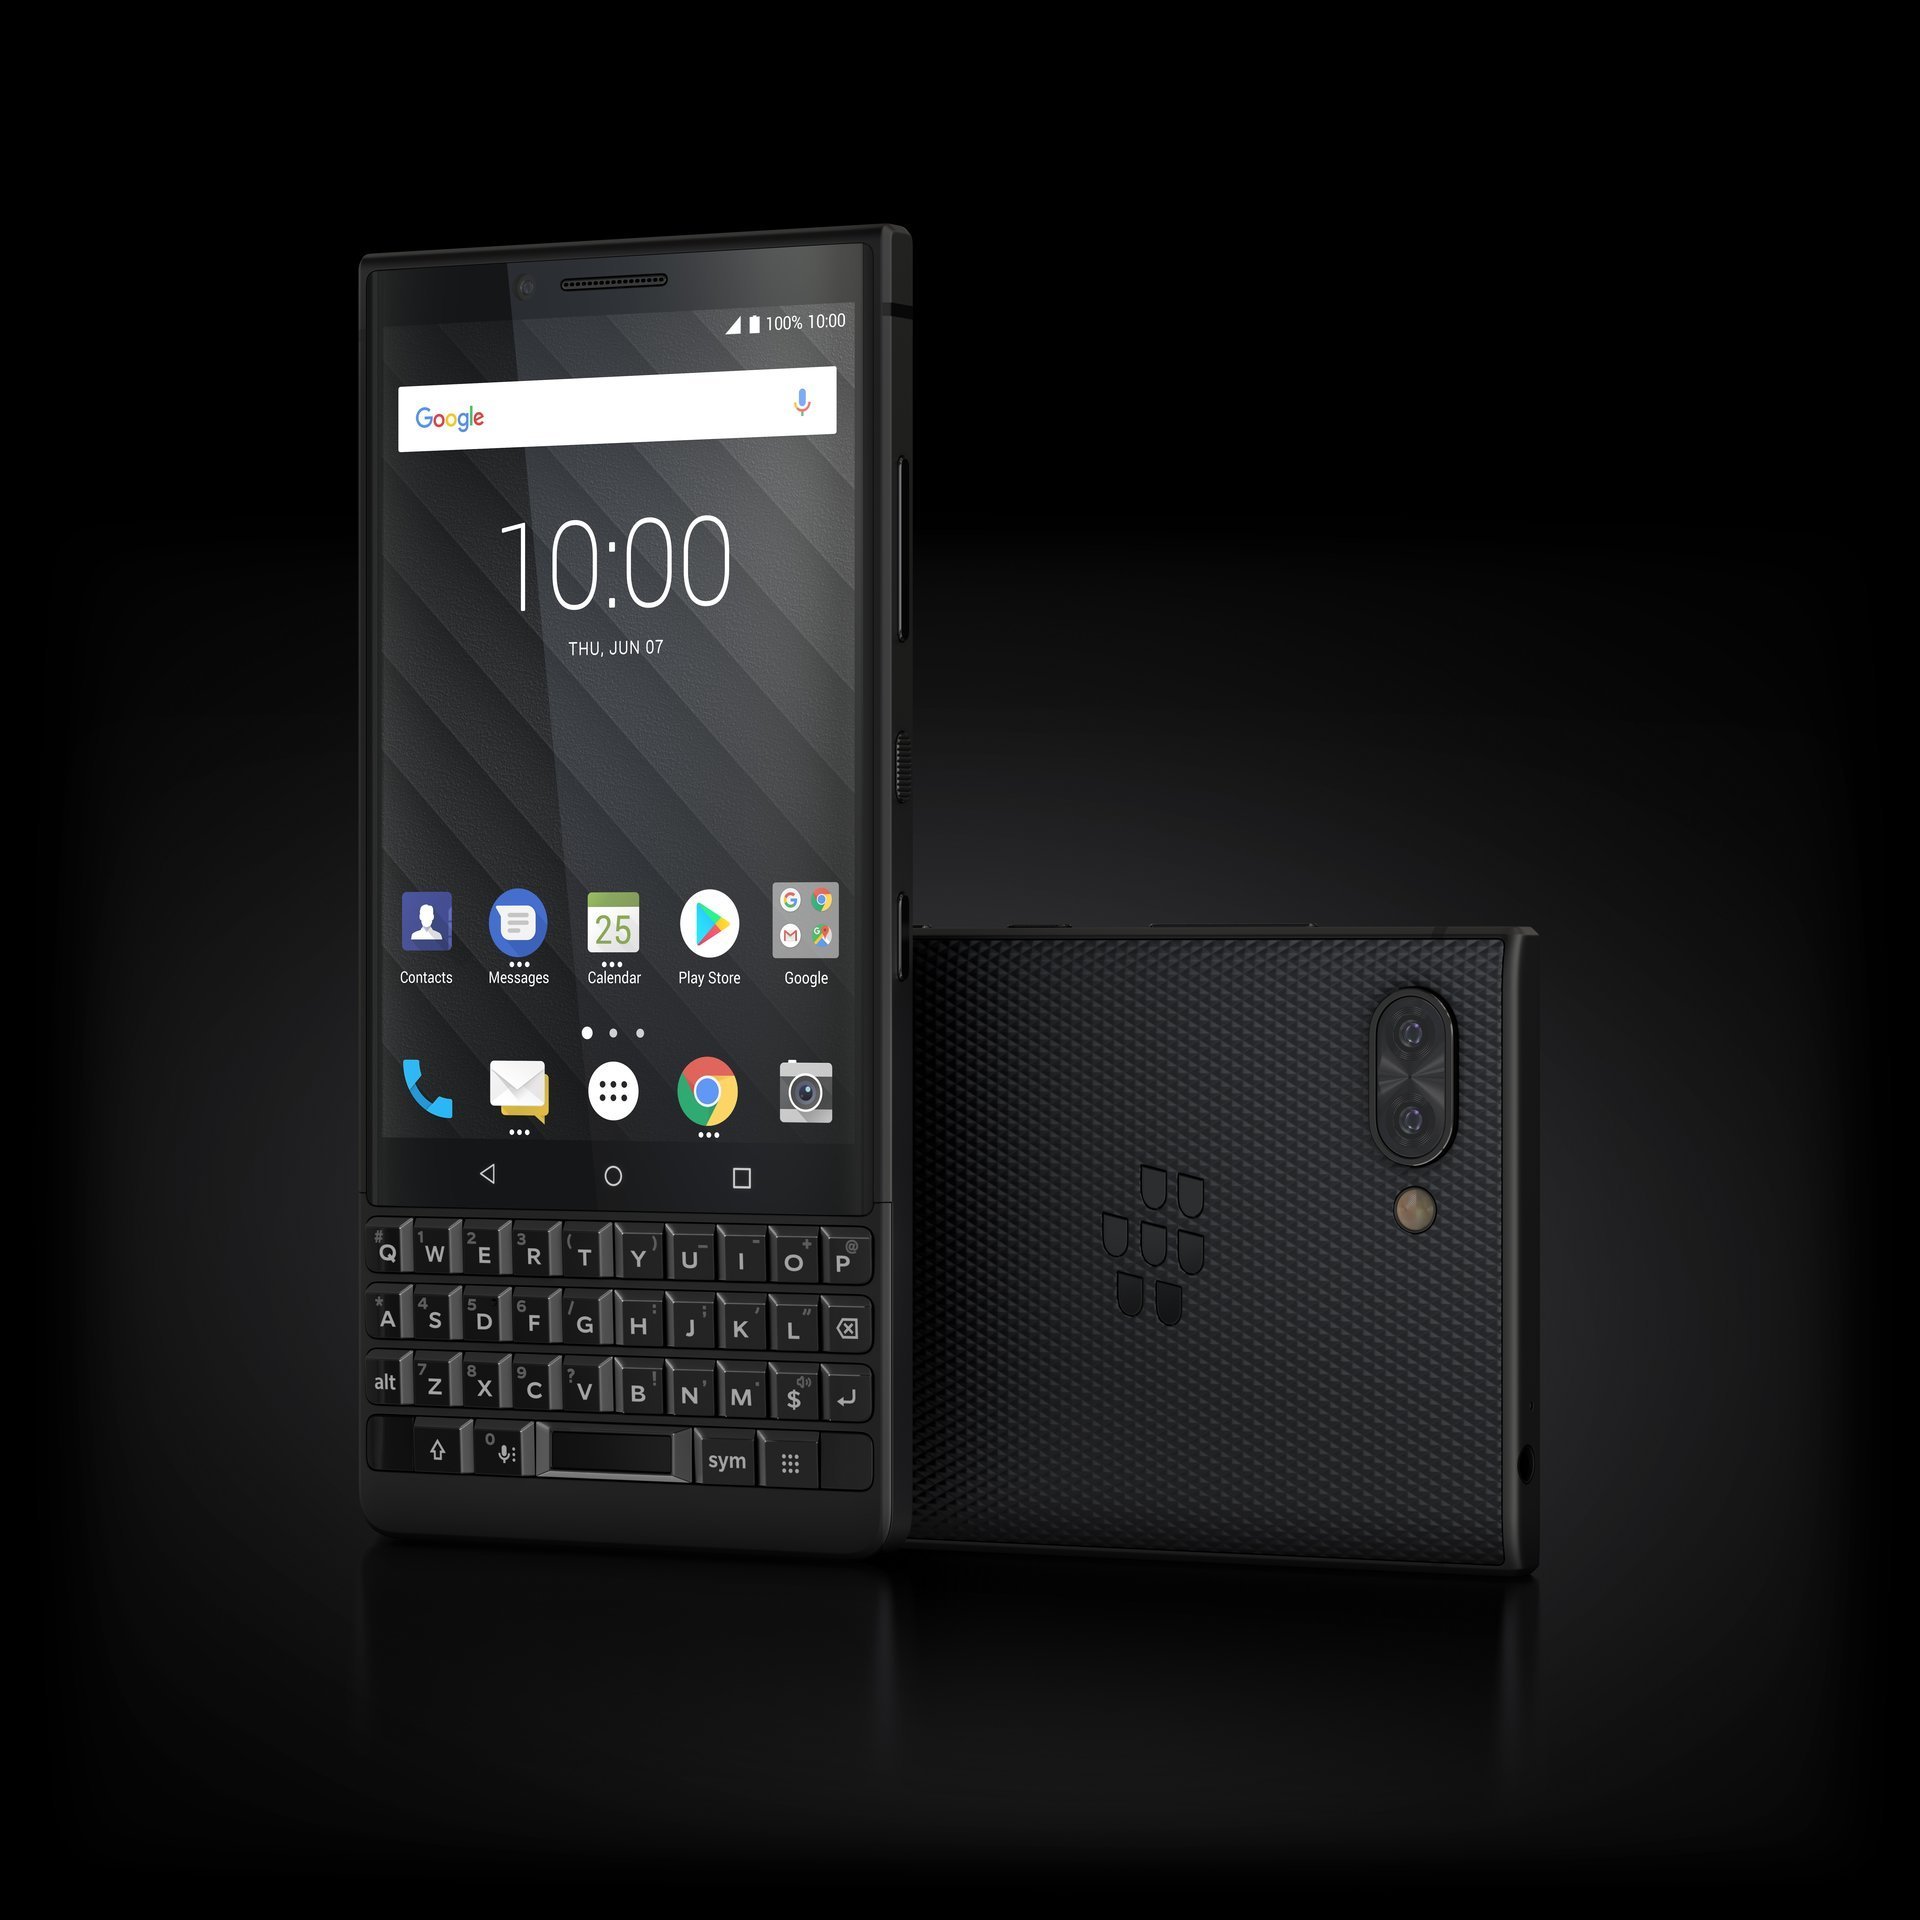 BlackBerry Android Phones Coming In 2021 With 5G & Physical Keyboard